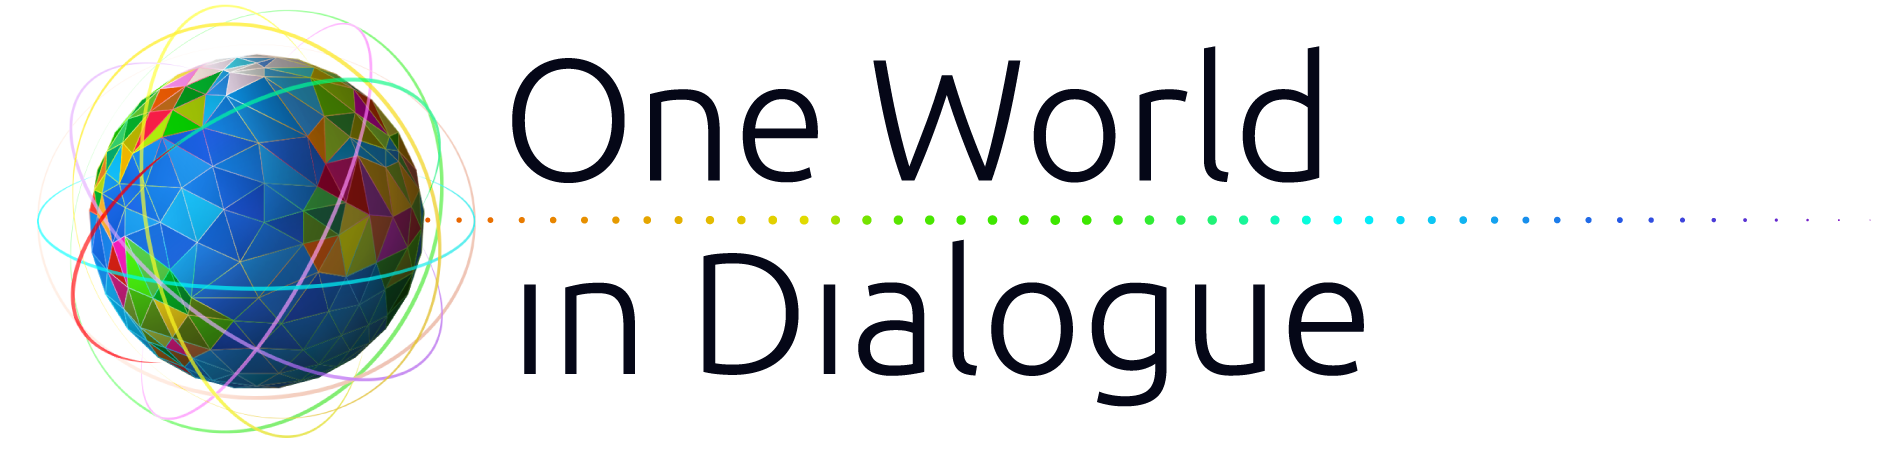 One World in Dialogue